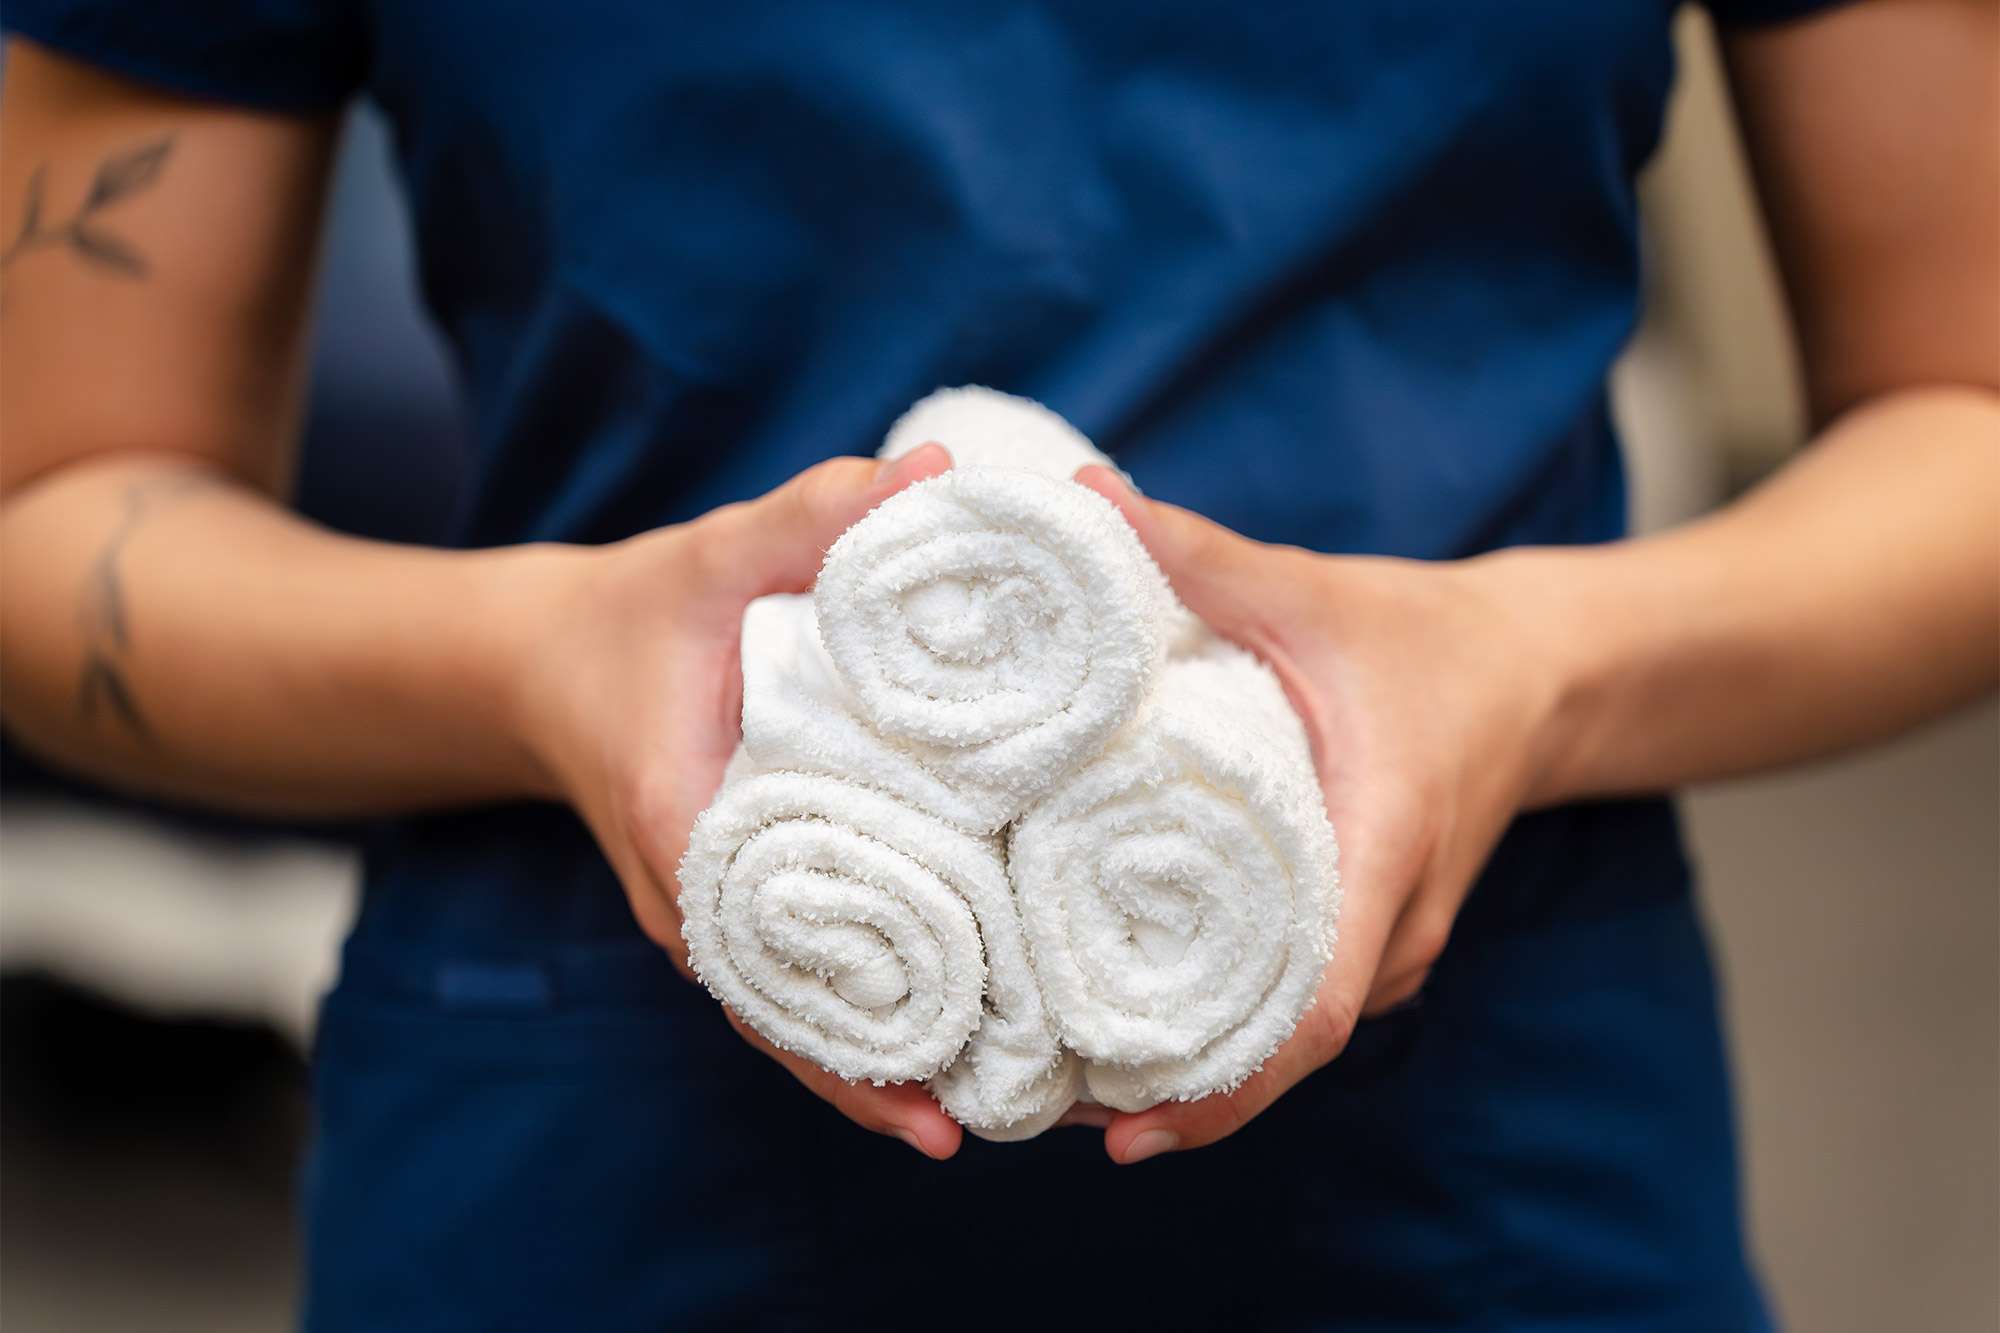 A close up view of a massage therapist holding three rolled up white towels in her hands.